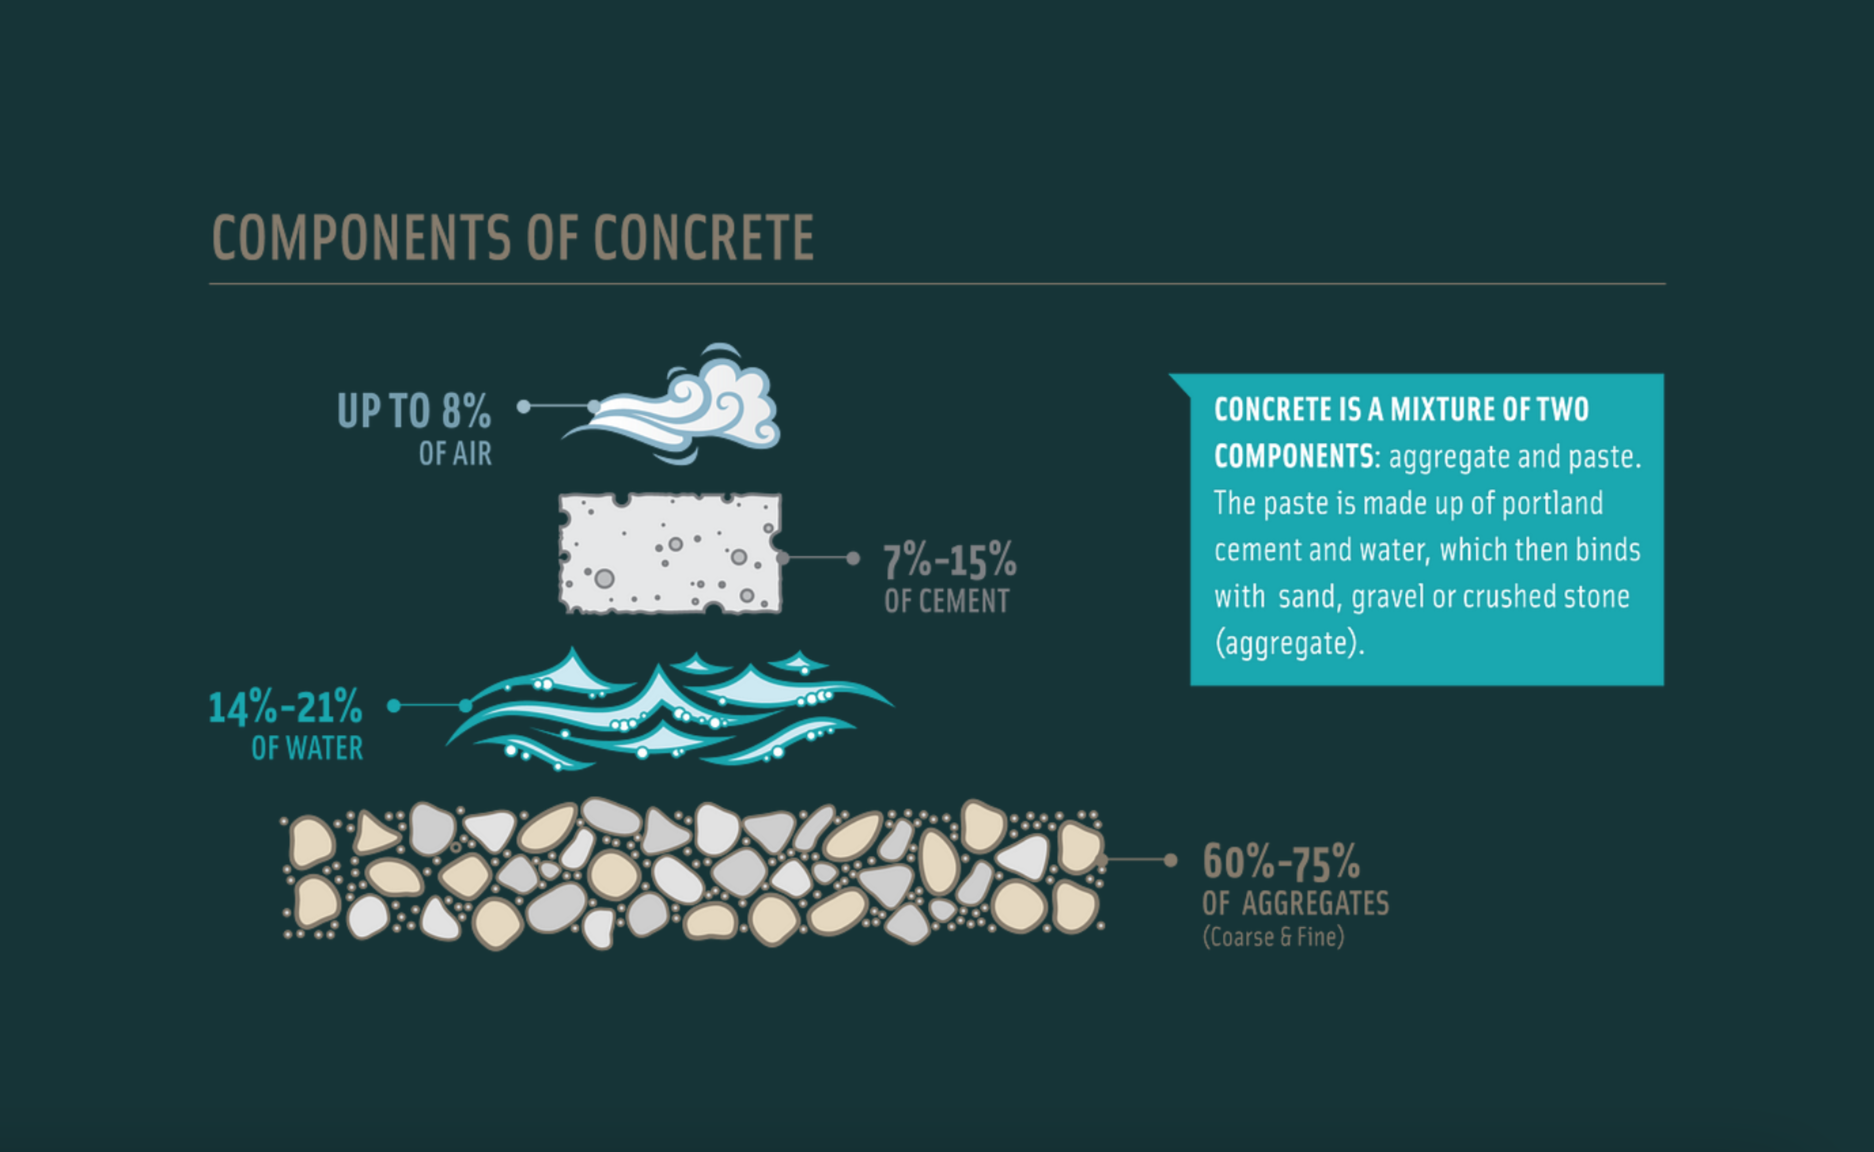 Components of Concrete: Cement, Aggregates, Water, and Admixtures